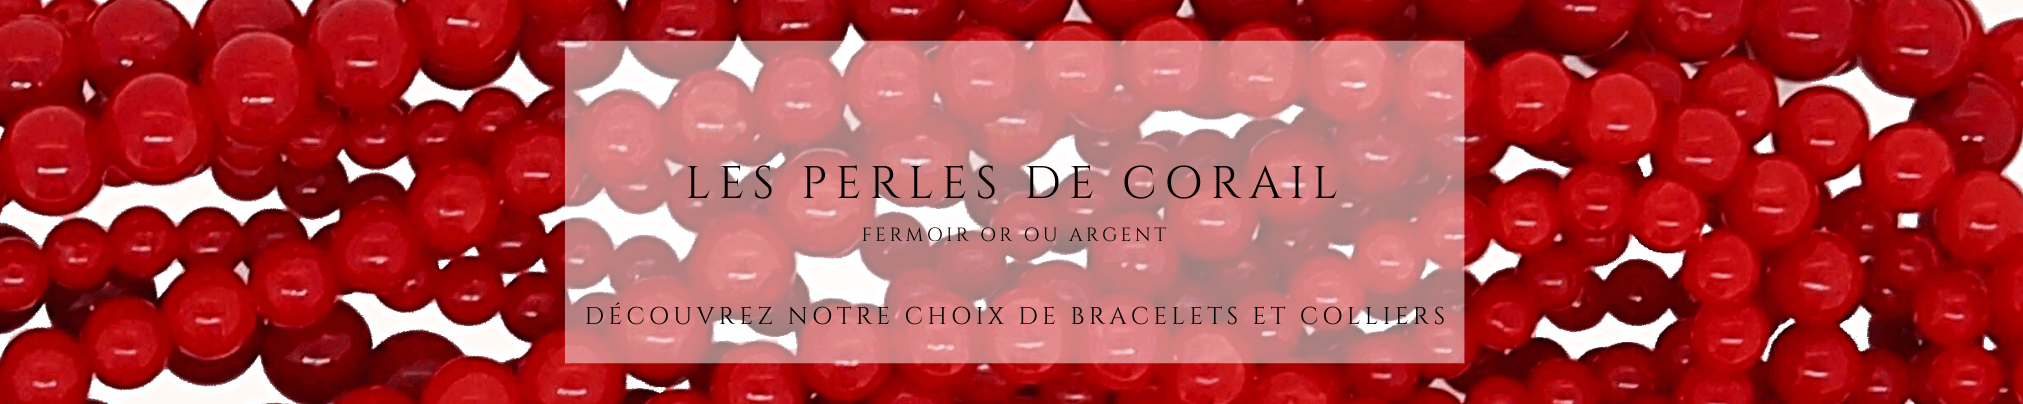 perles corail rouge corse